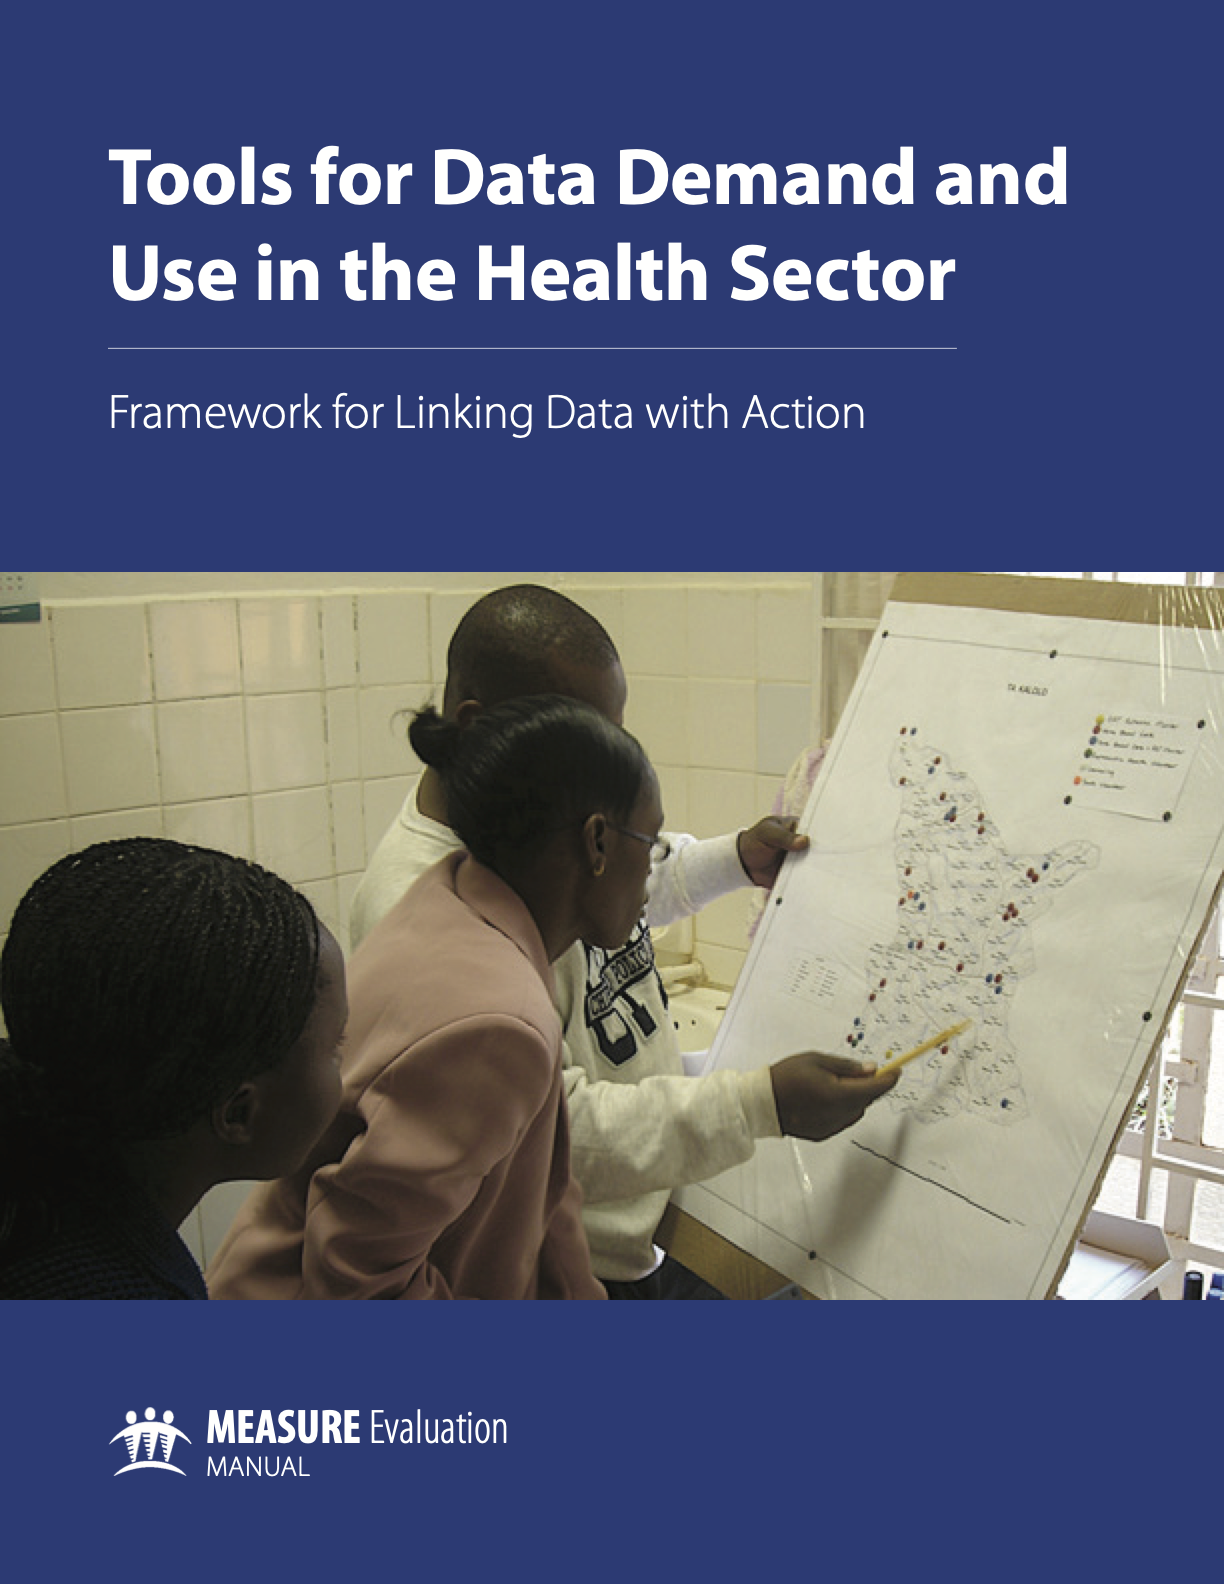 Tools for Data Demand and Use in the Health Sector: Framework for Linking Data to Action